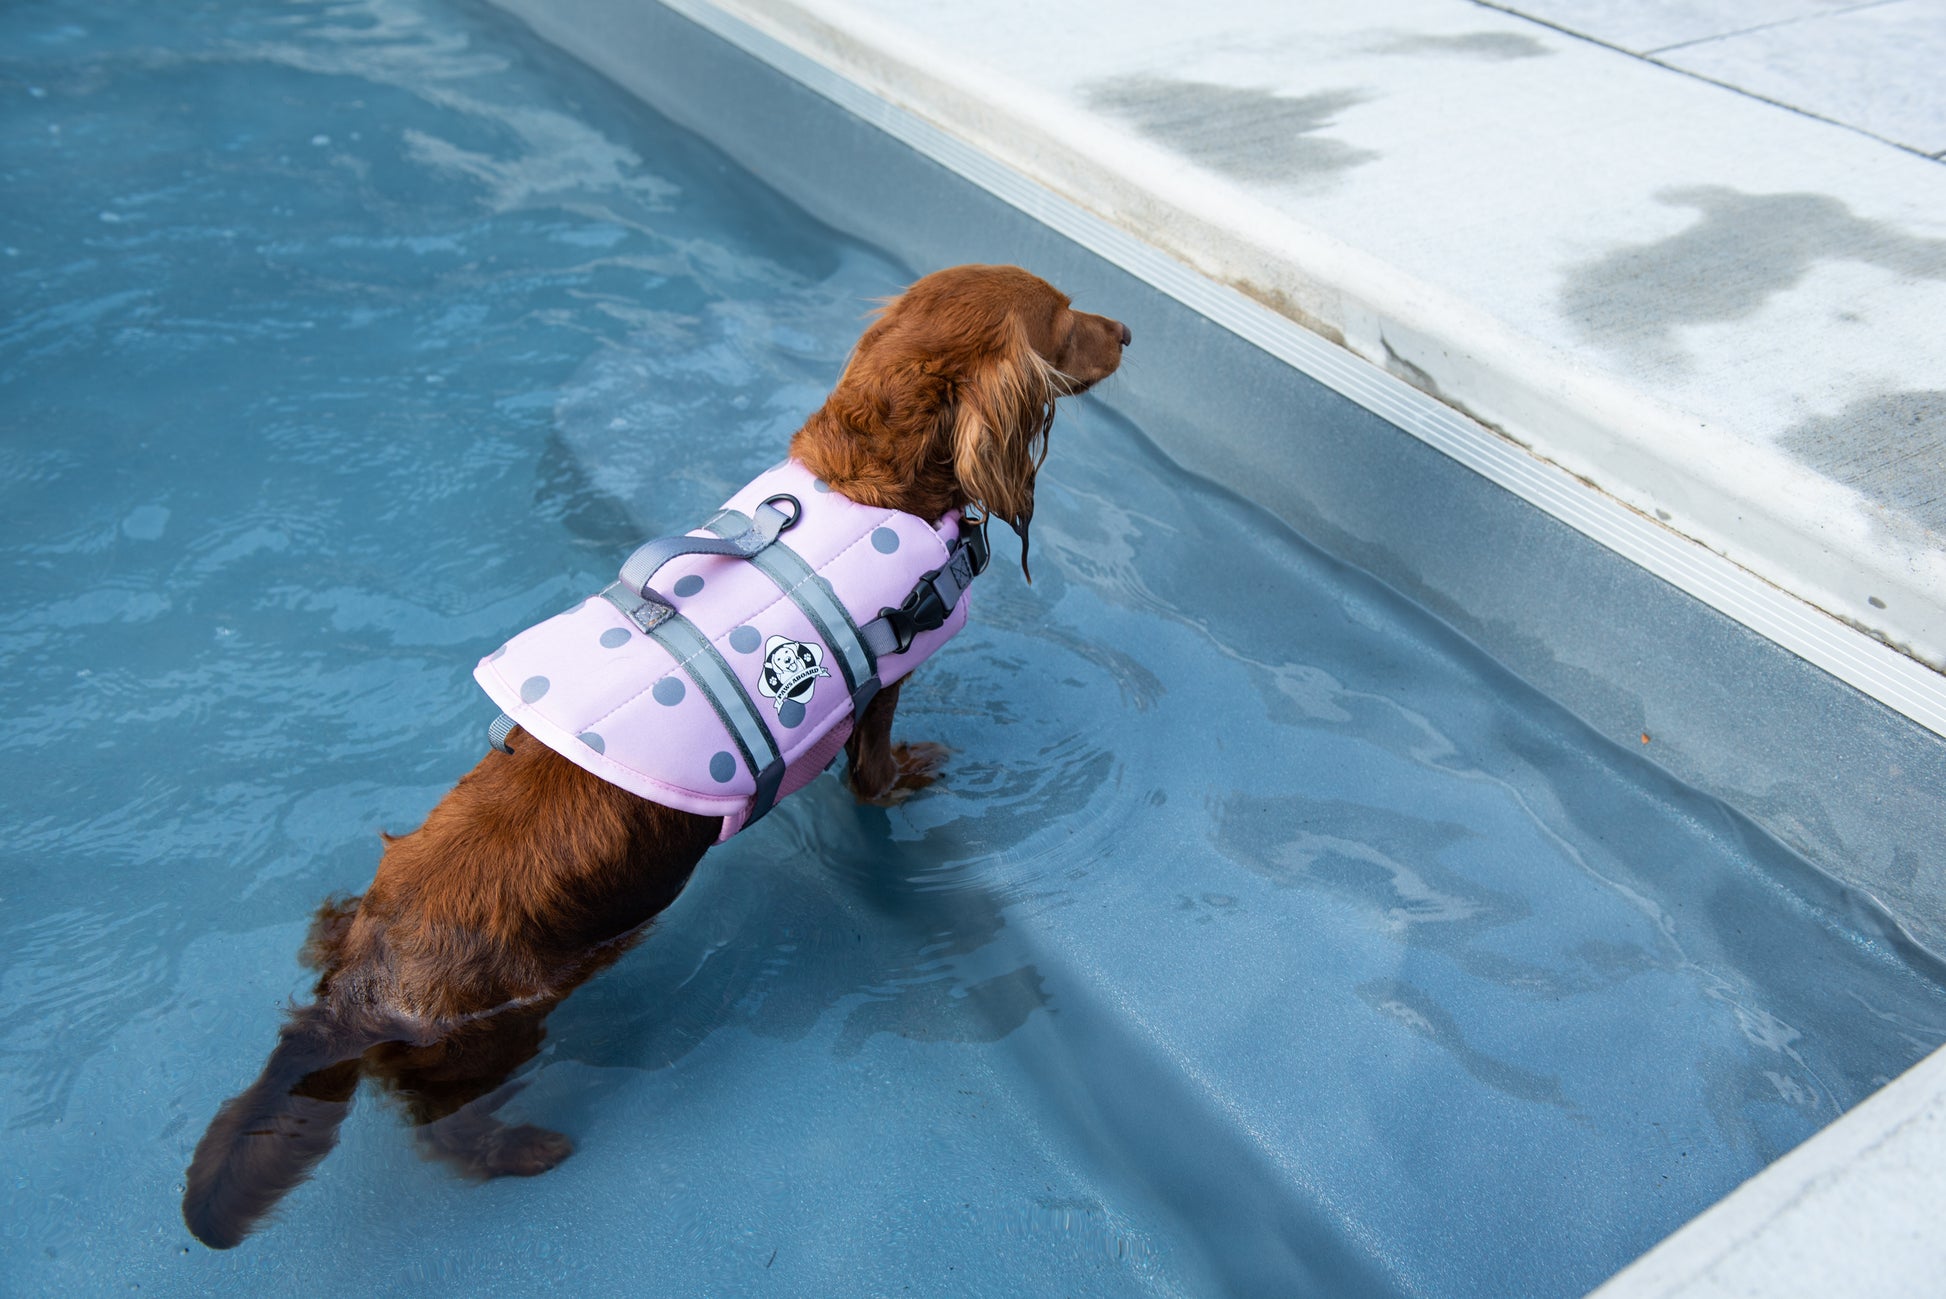 Long haired Dachshund standing in an in-ground swimming pool. The dog is wearing a soft pink with grey polka dot life jacket that has reflective straps and a top rescue handle.